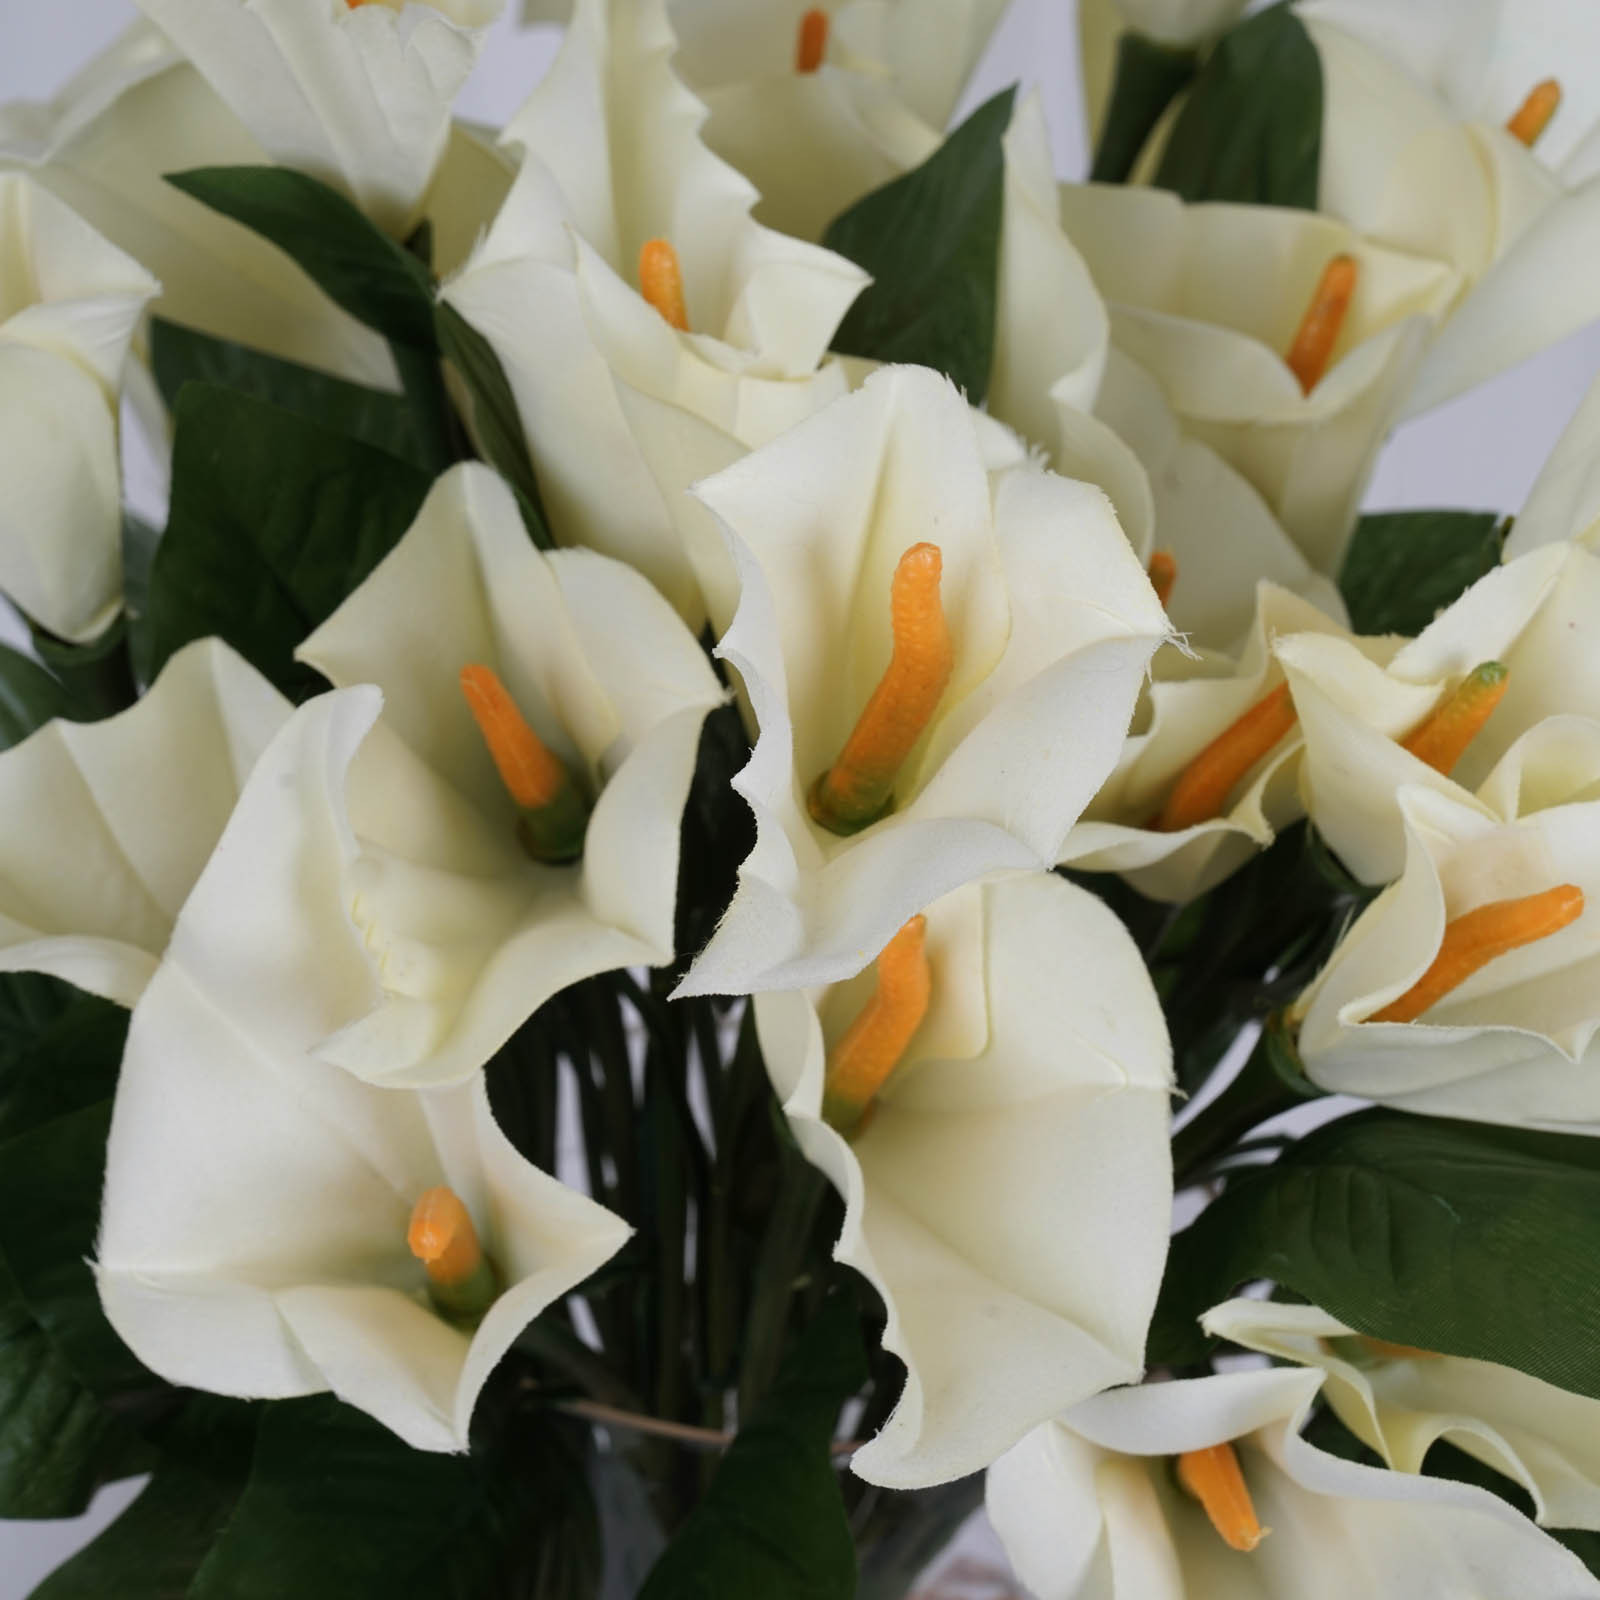 Cheap Wholesale Wedding Flowers
 168 Silk Calla Lily Flowers for Wedding Bouquets